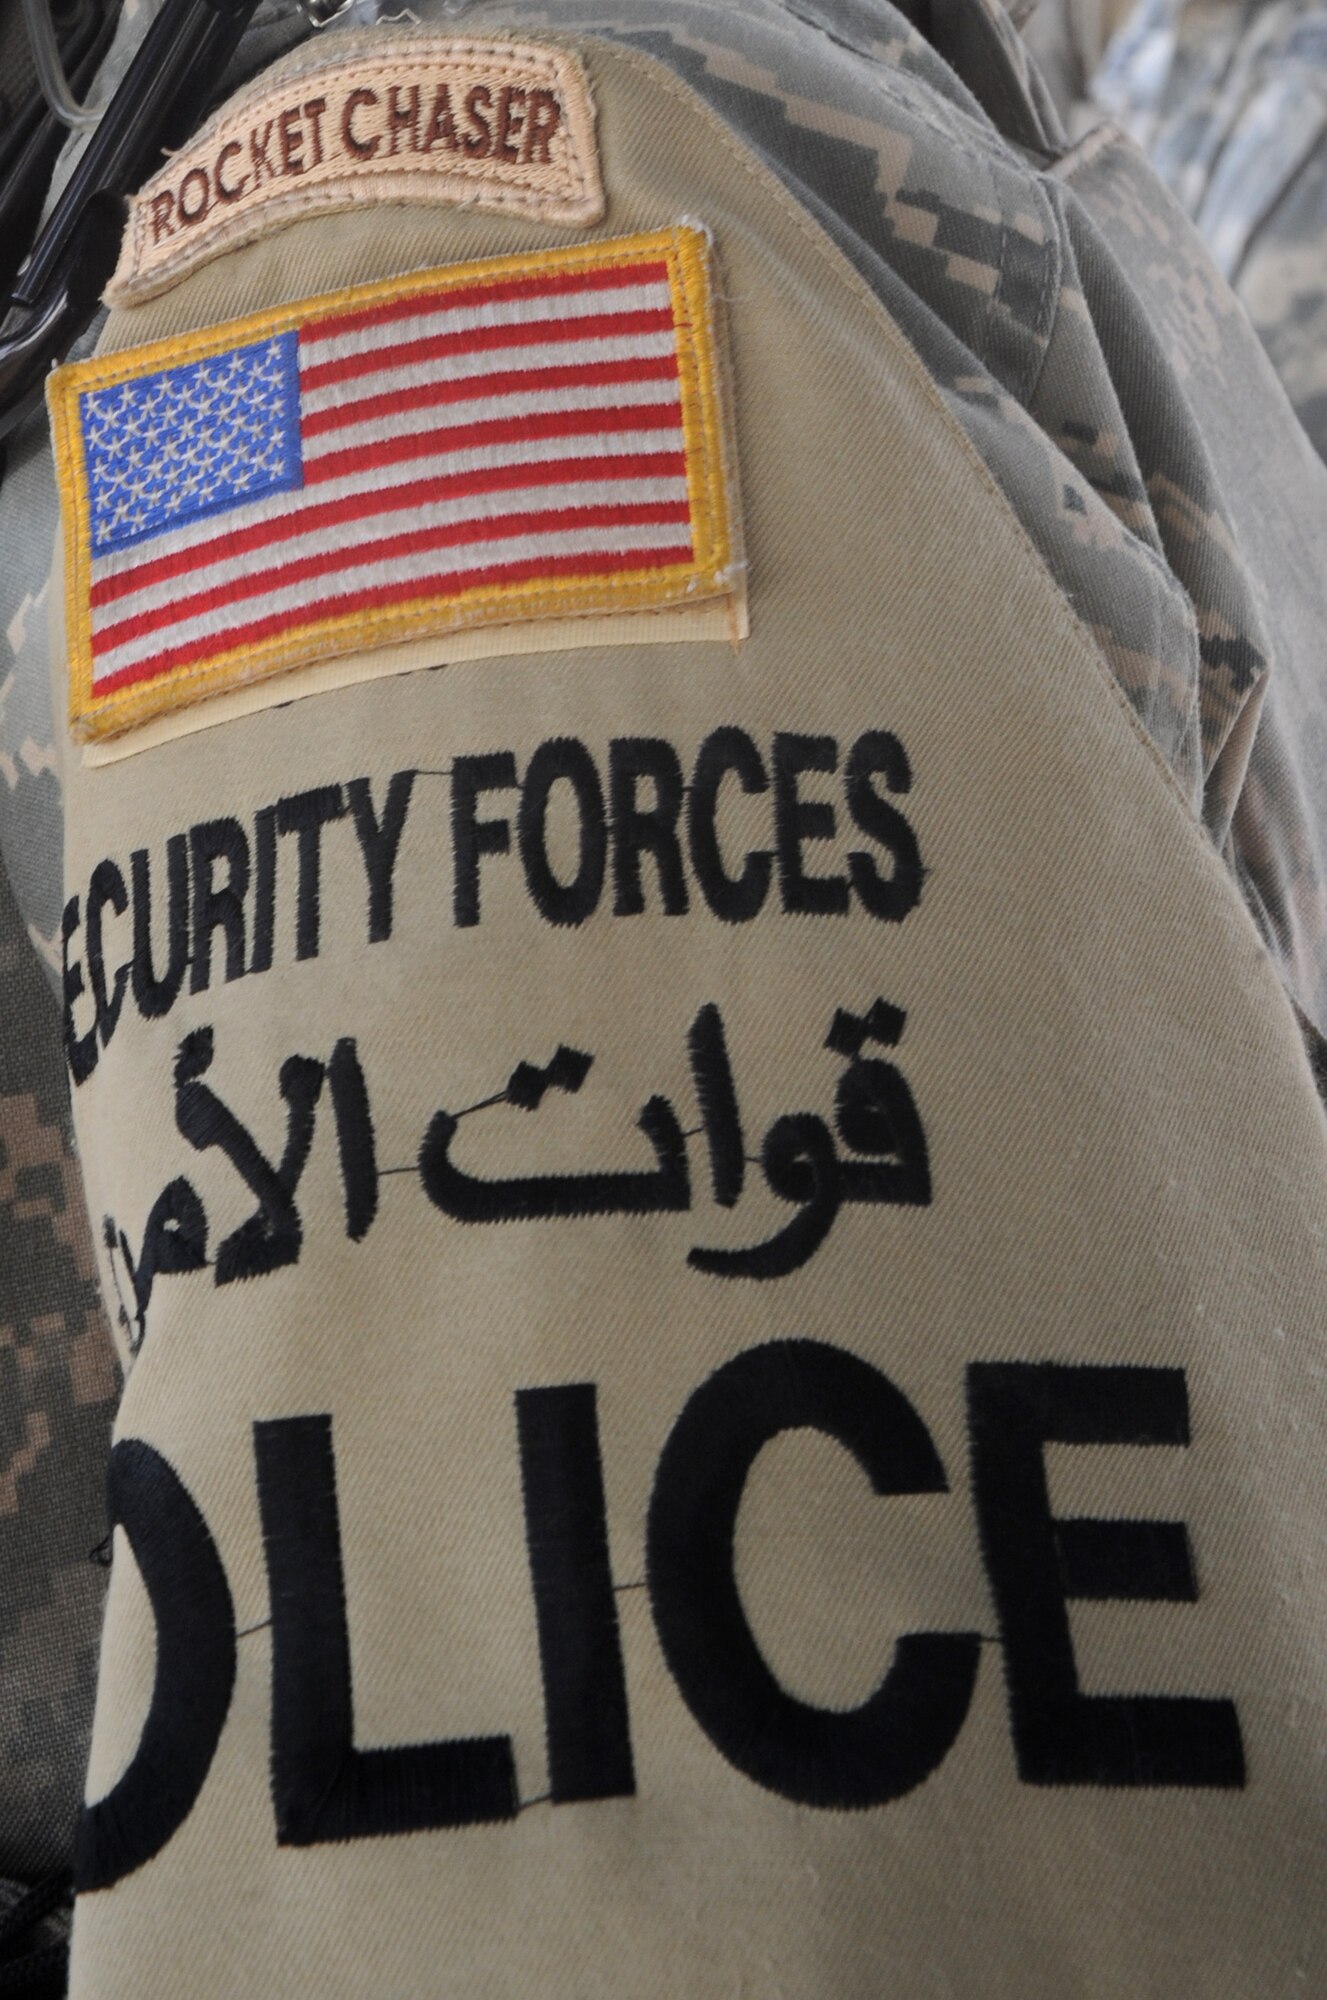 INTERNATIONAL ZONE, Baghdad, Iraq -- Members of the 732nd Expeditionary Security Forces Squadron, Detachment 4, wear their "Rocket Chaser" badge proudly. These defenders are responsible for responding to more than 200 rocket attacks on the International Zone in about five months, as well as providing law and order in the IZ. (U.S. Air Force photo/Tech. Sgt. Amanda Callahan)